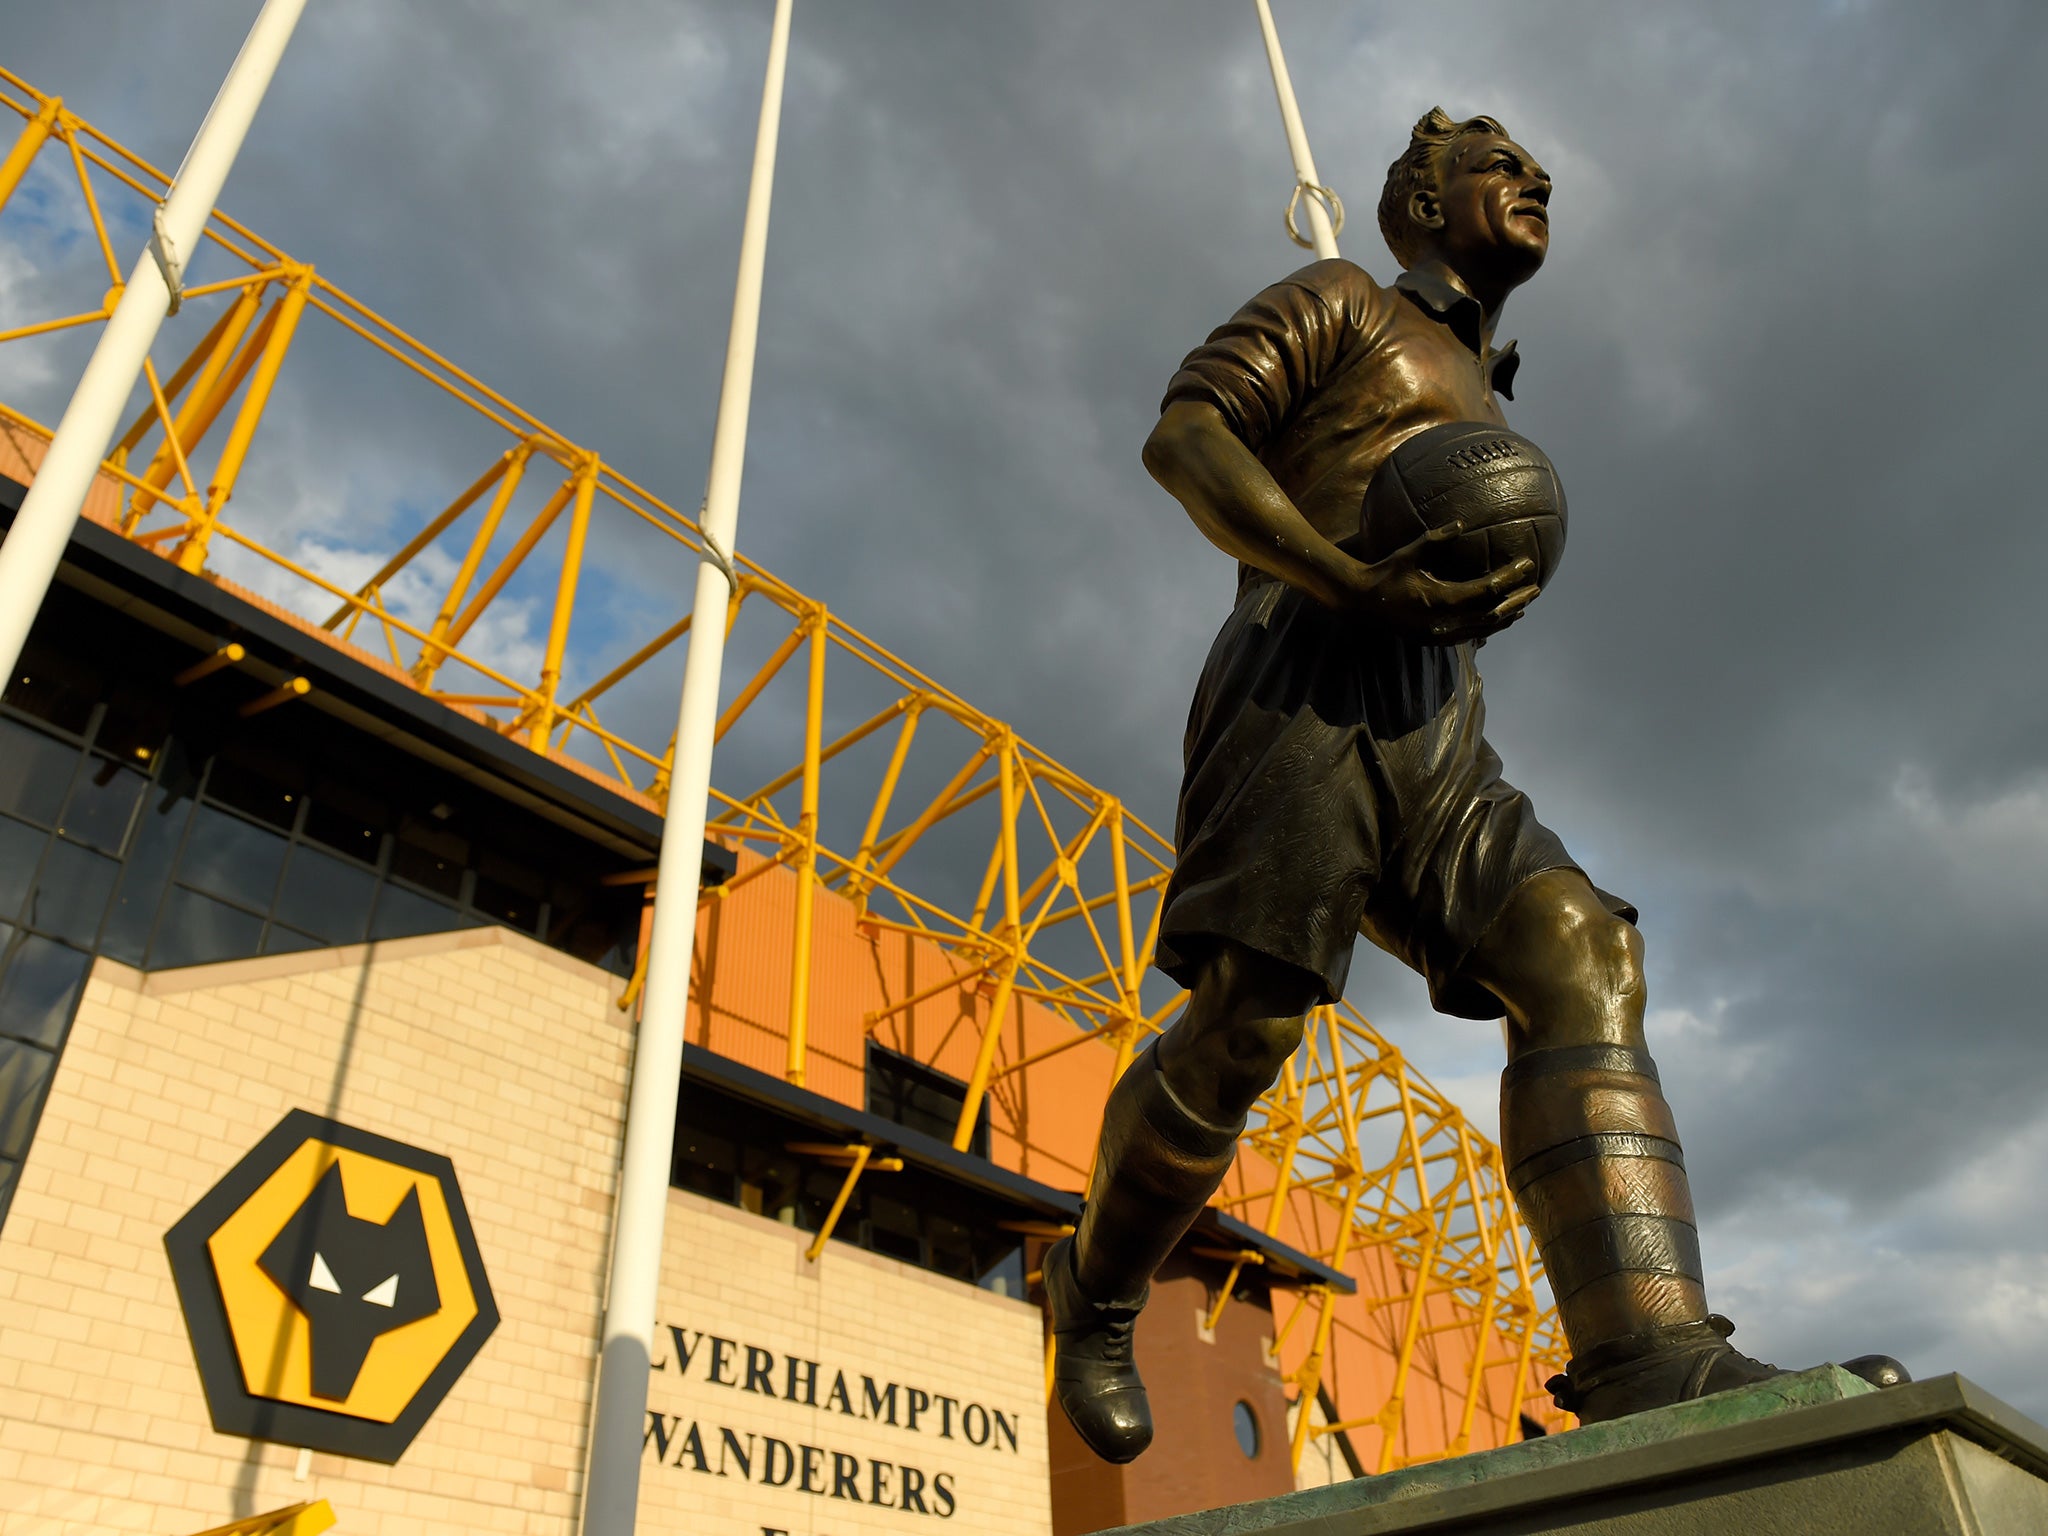 A general view of Molineux, Wolverhampton Wanderers' ground